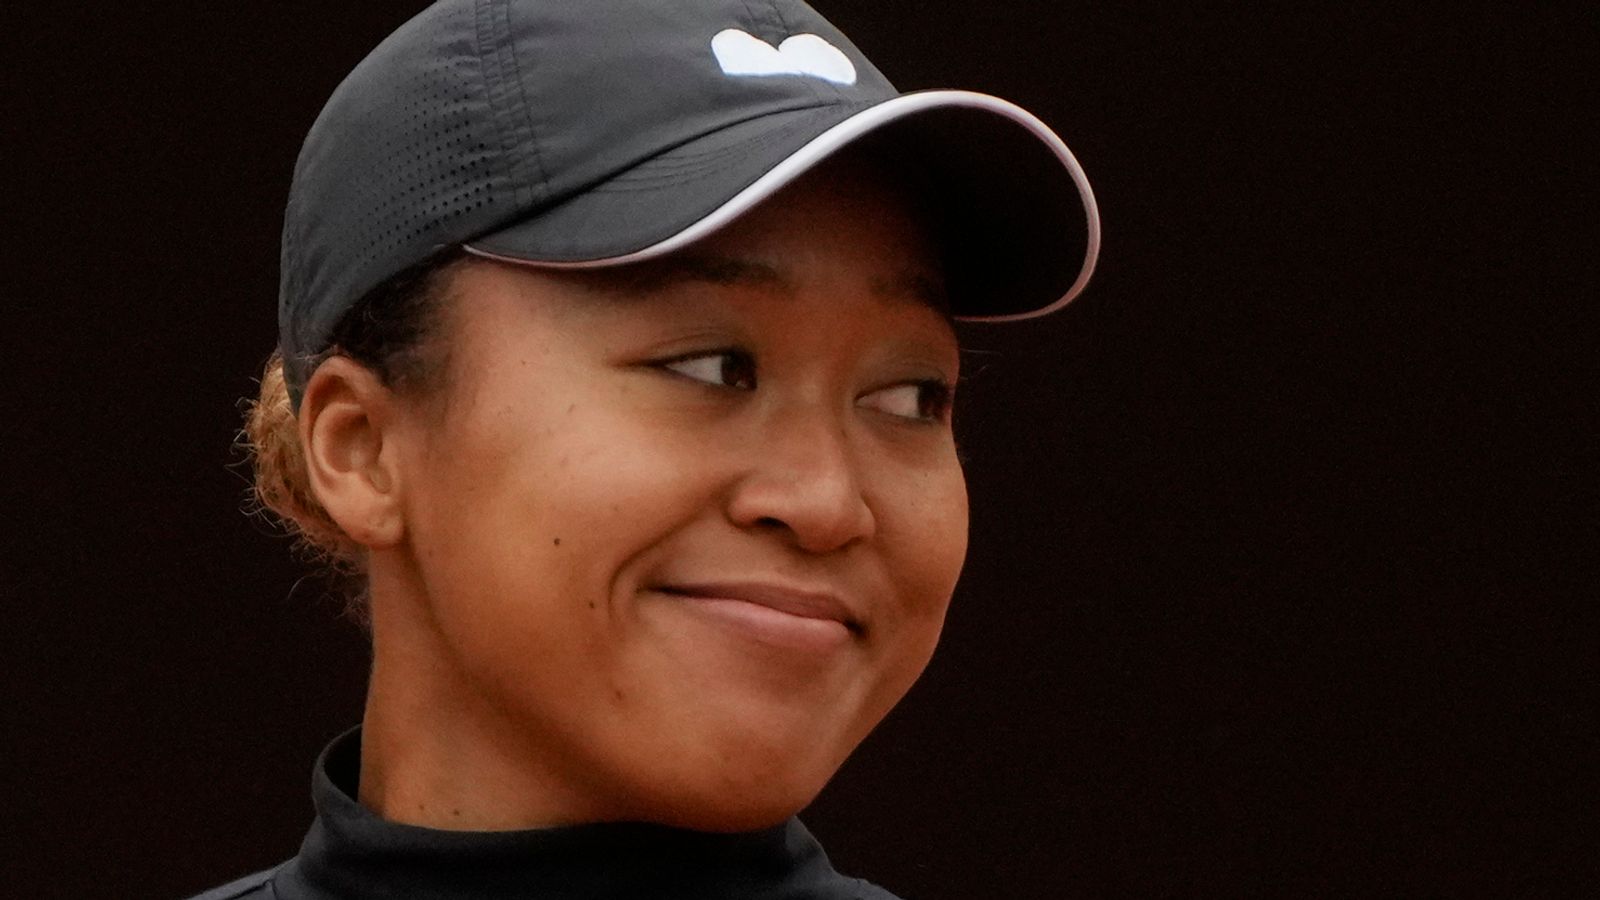 Naomi Osaka: Four-time Grand Slam champion to launch own sports agency